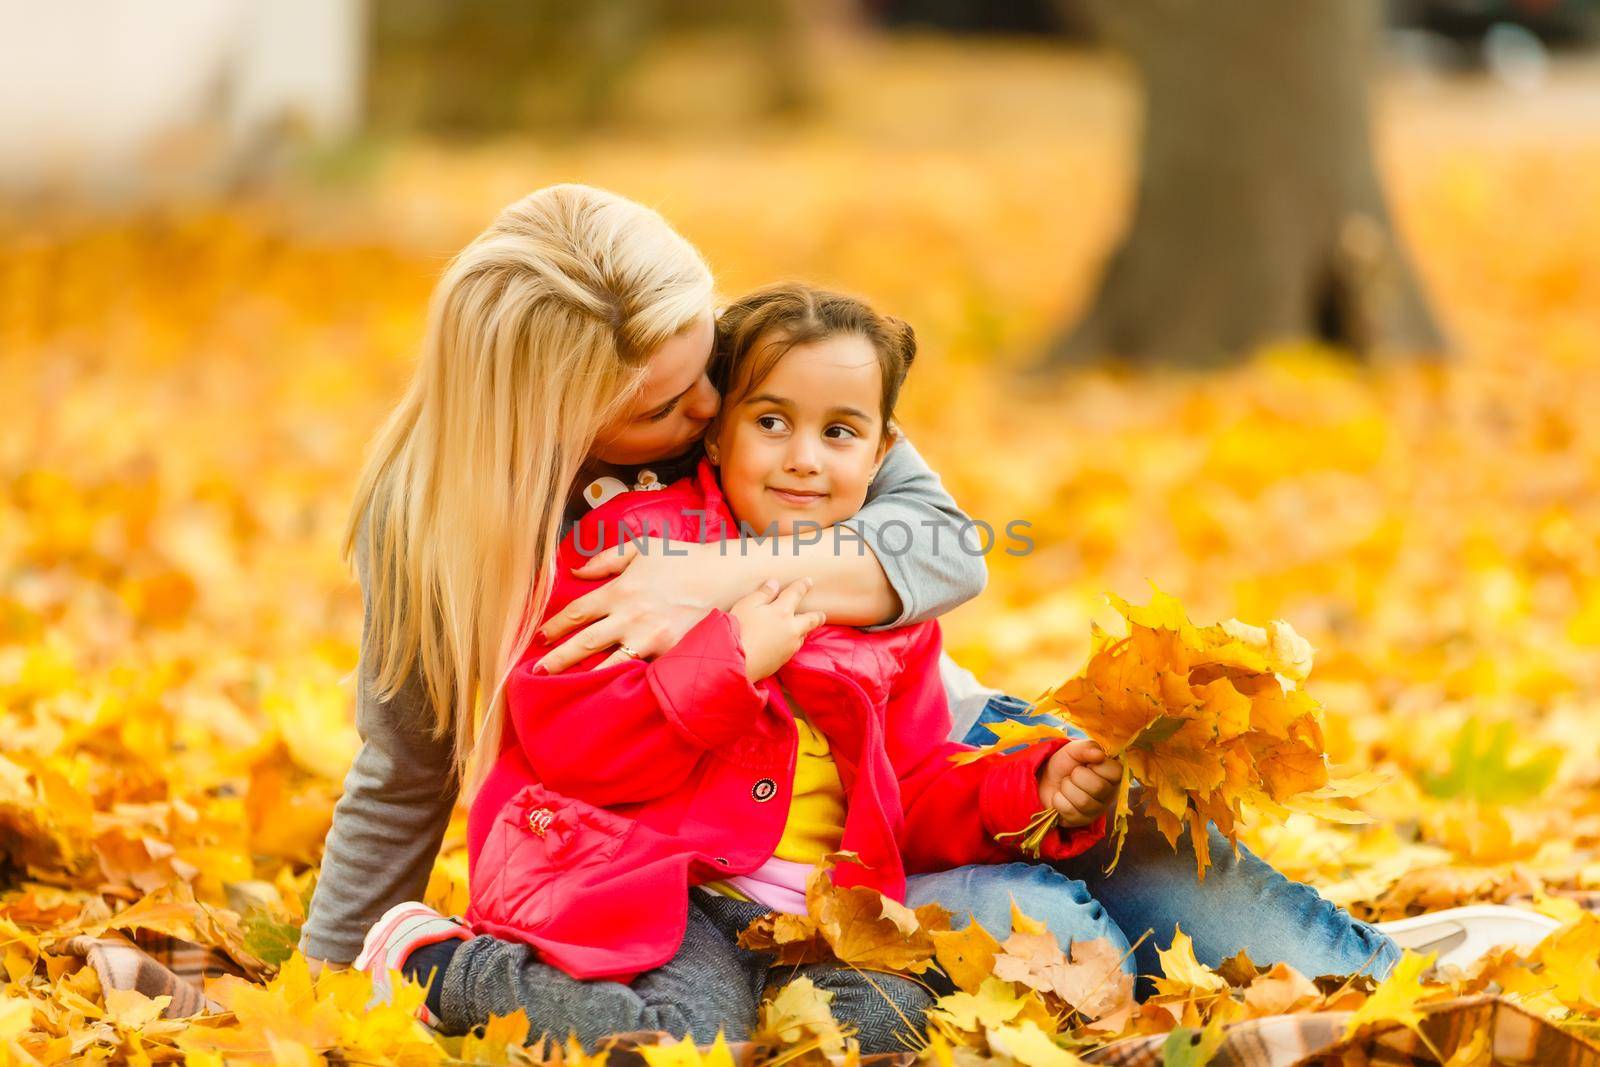 Happy parent and kid holding autumn yellow leaves outdoor.